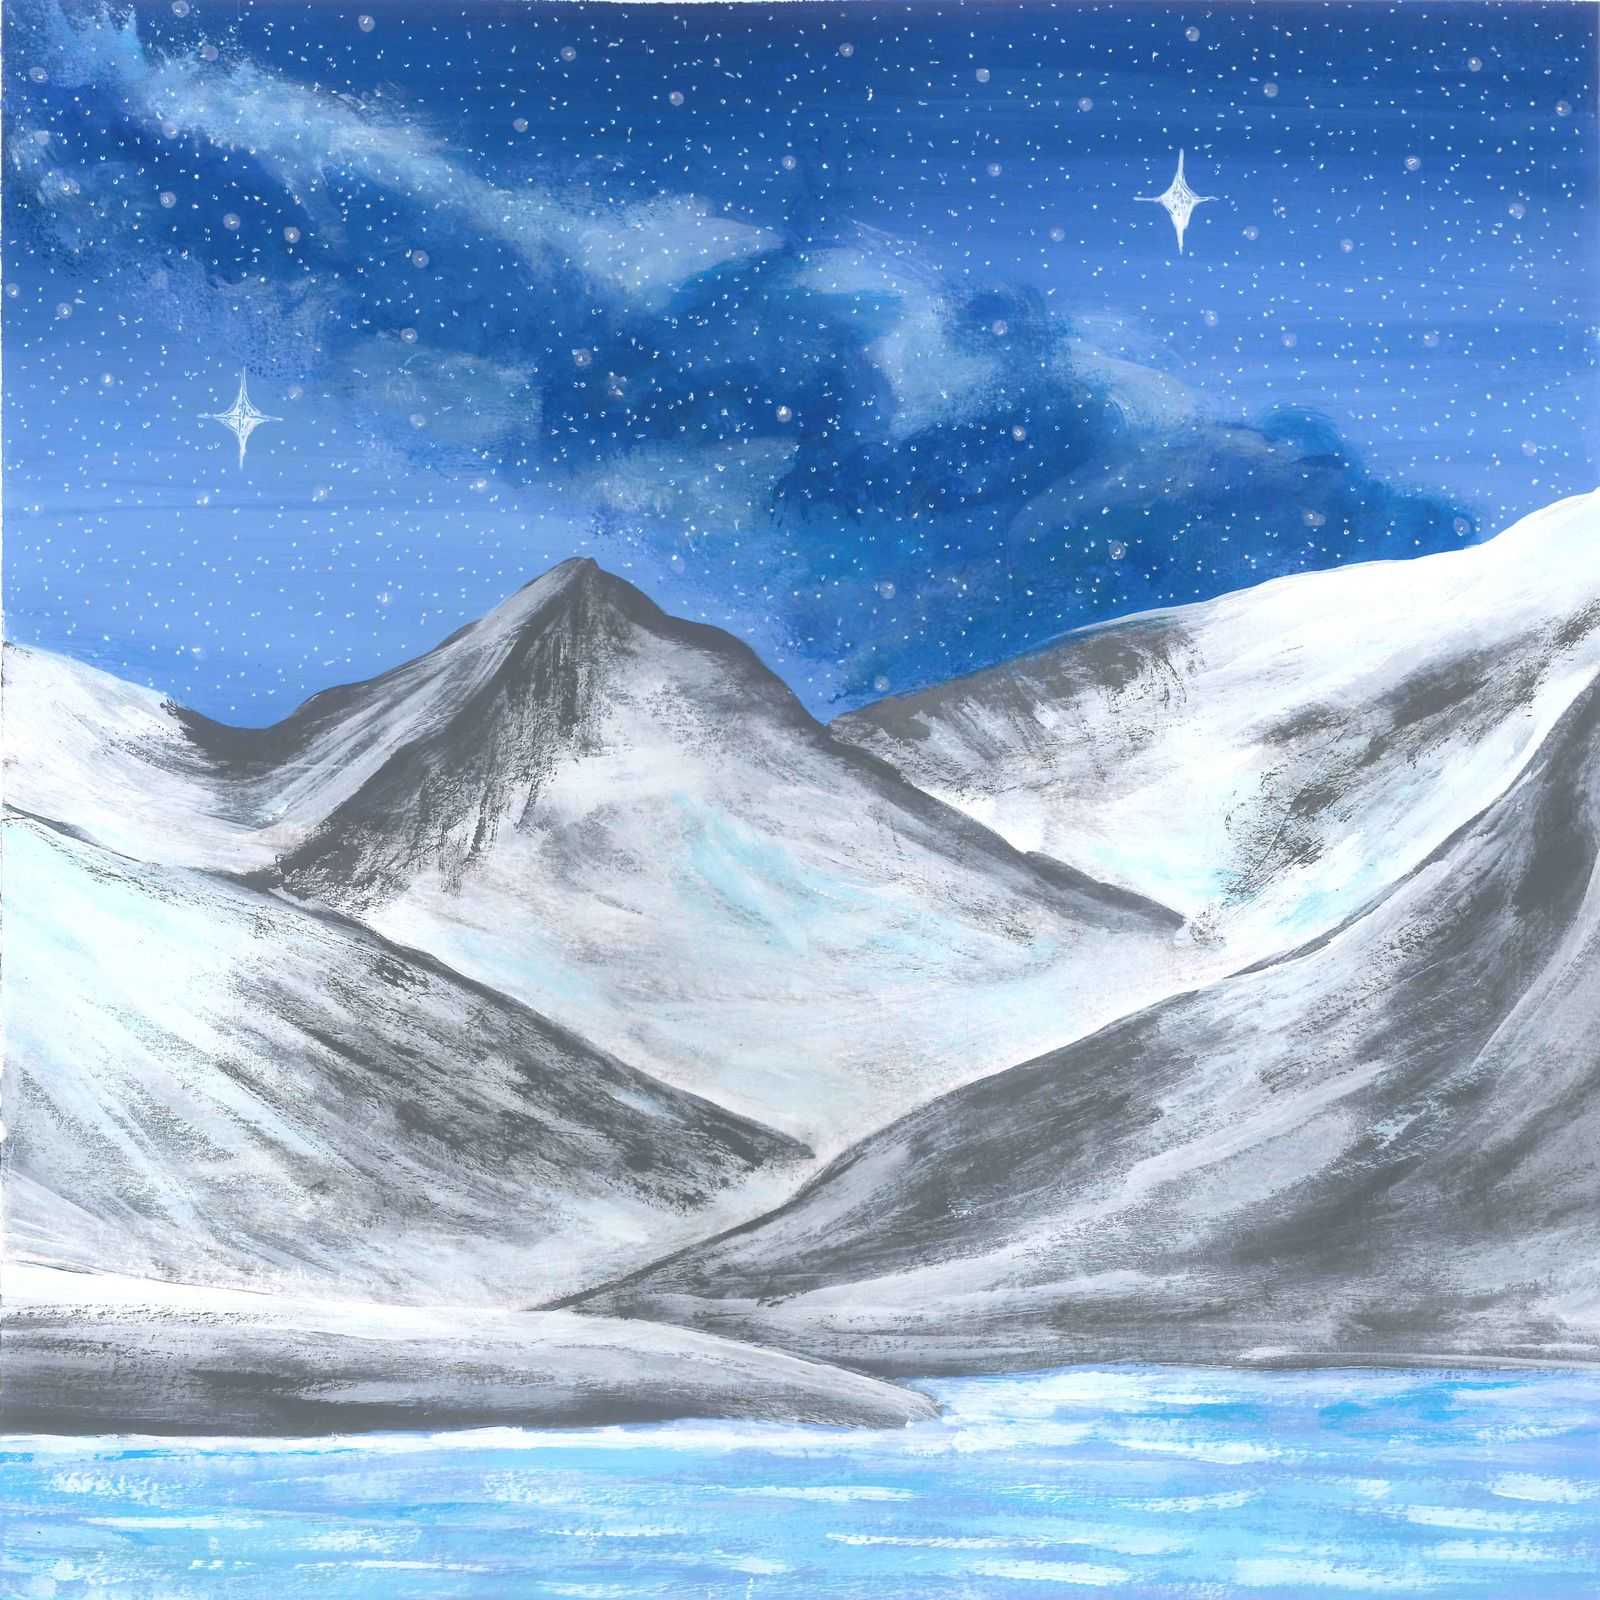 Groaning Iceberg - nature landscape painting - earth.fm